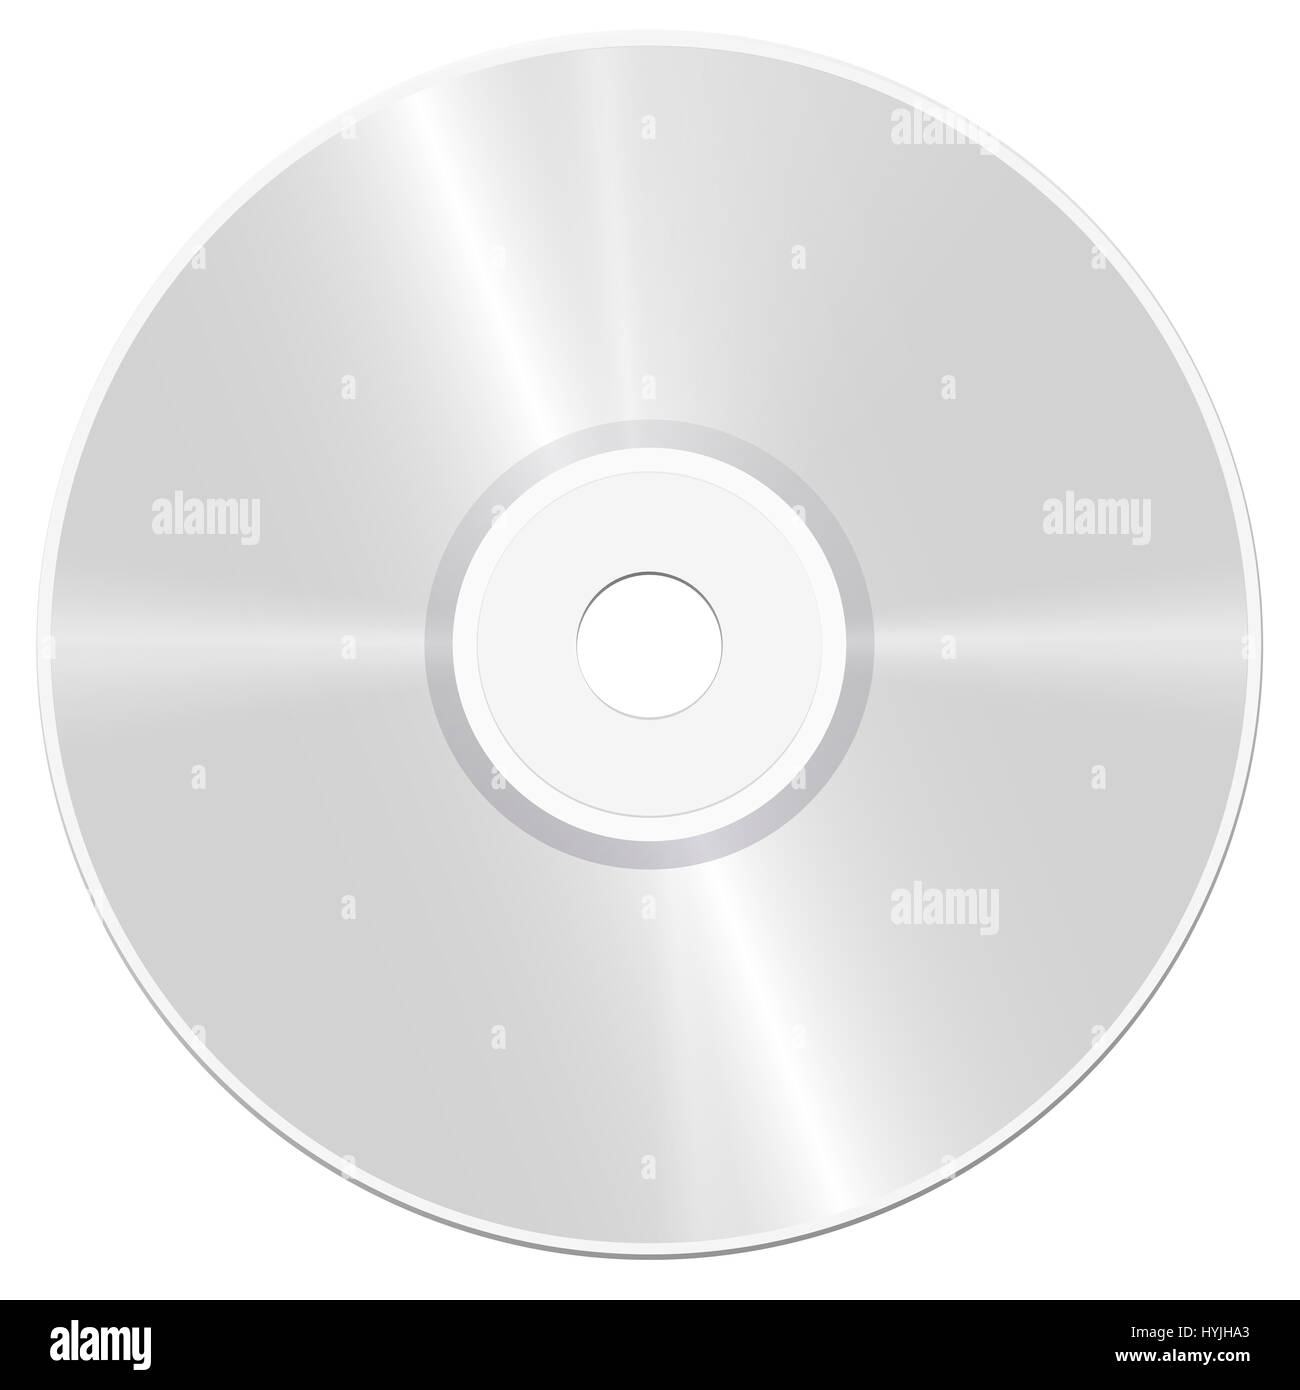 CD - compact disc - realistic isolated illustration on white background. Stock Photo